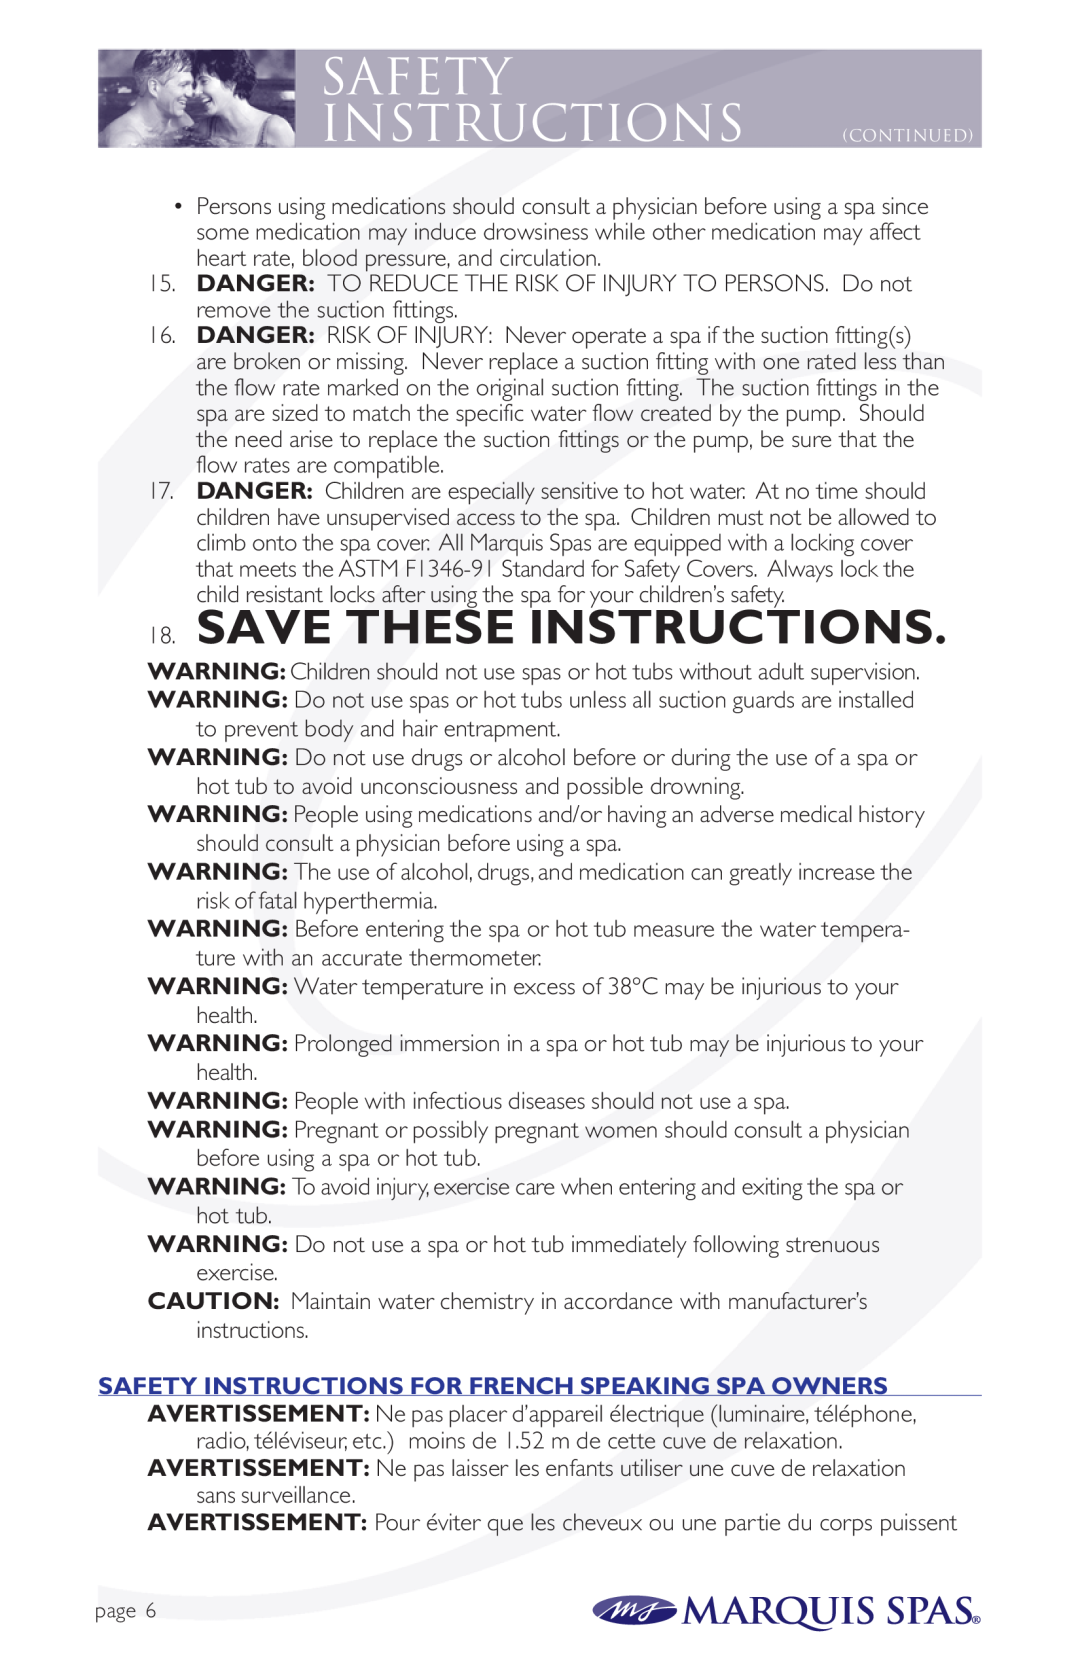 Marquis Spas owner manual Save These Instructions, Safety Instructions Continued 